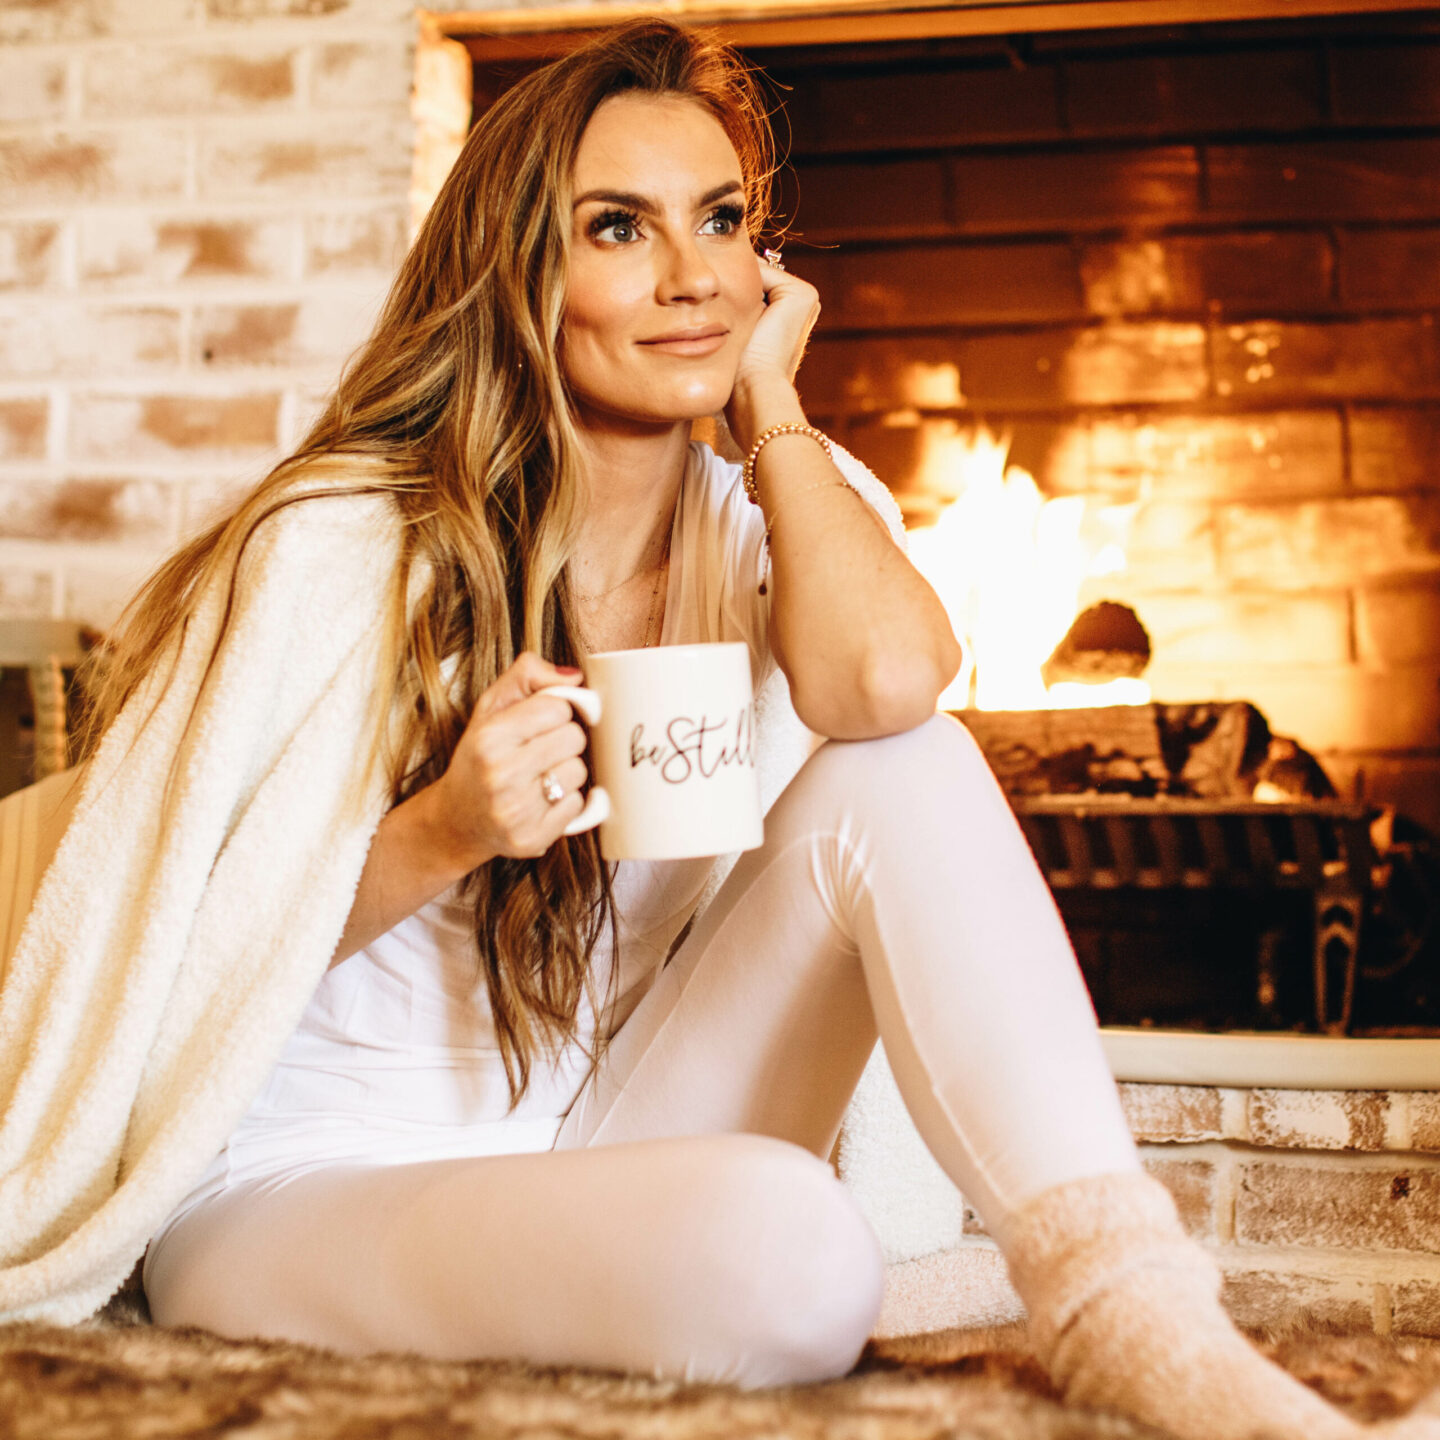 hygge gift ideas for Christmas by Angela Lanter lifestyle blogger